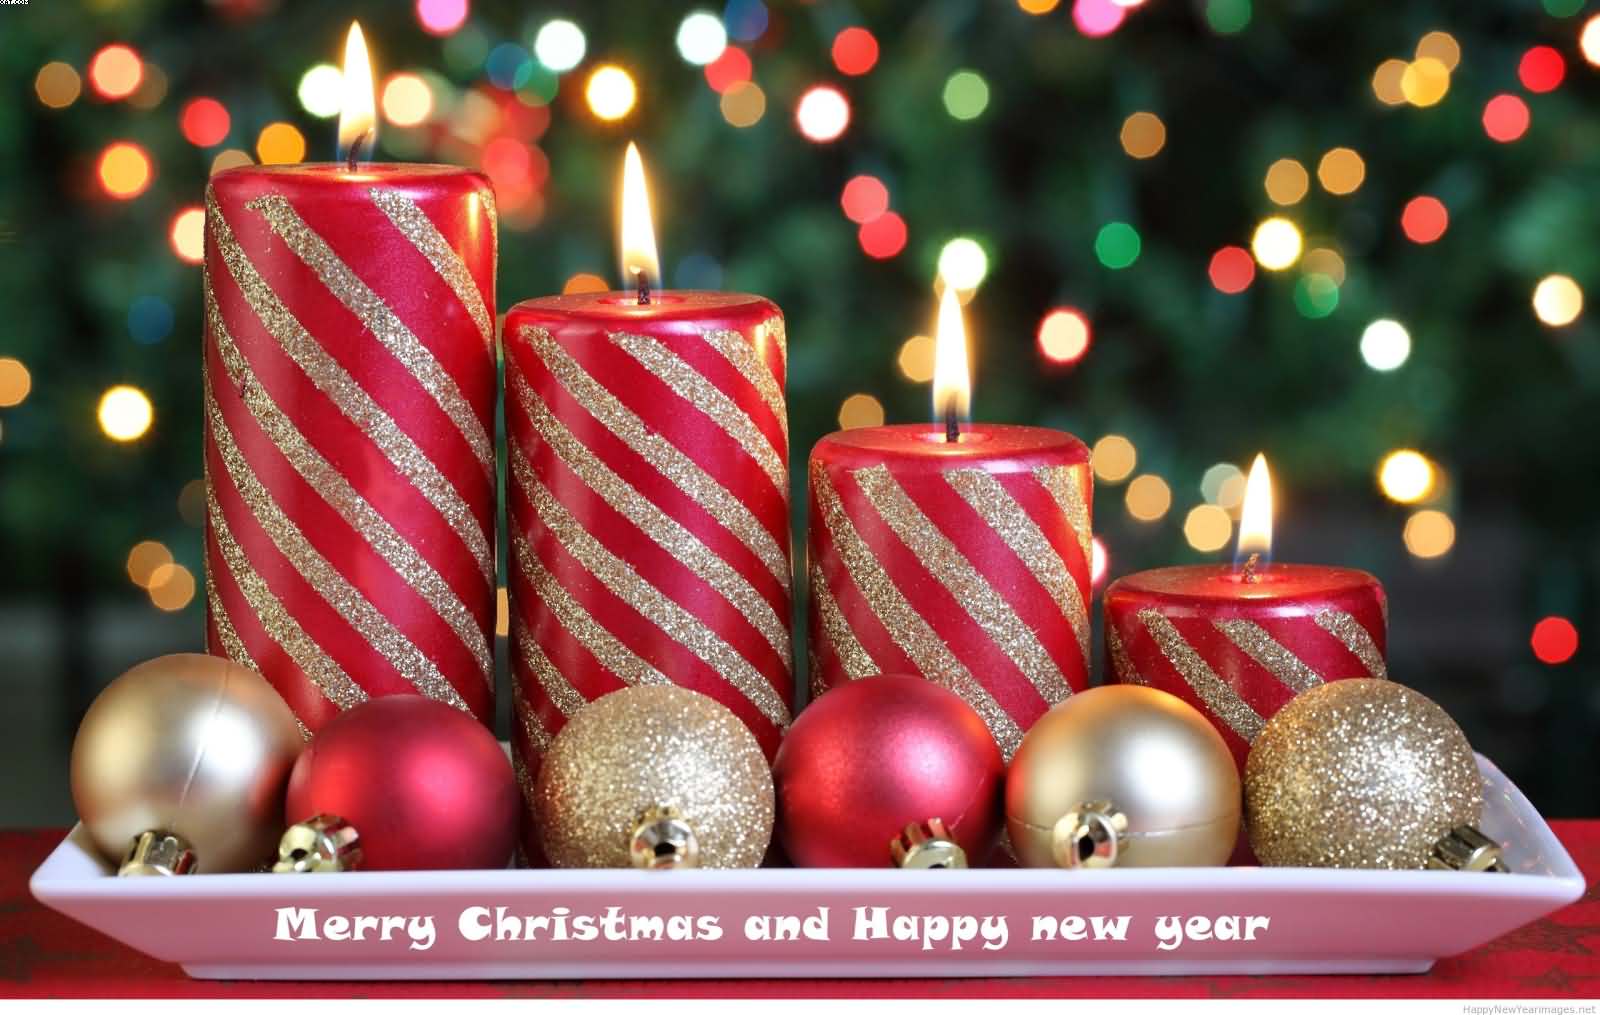 Merry Christmas and Happy New year beautiful candles and balls picture